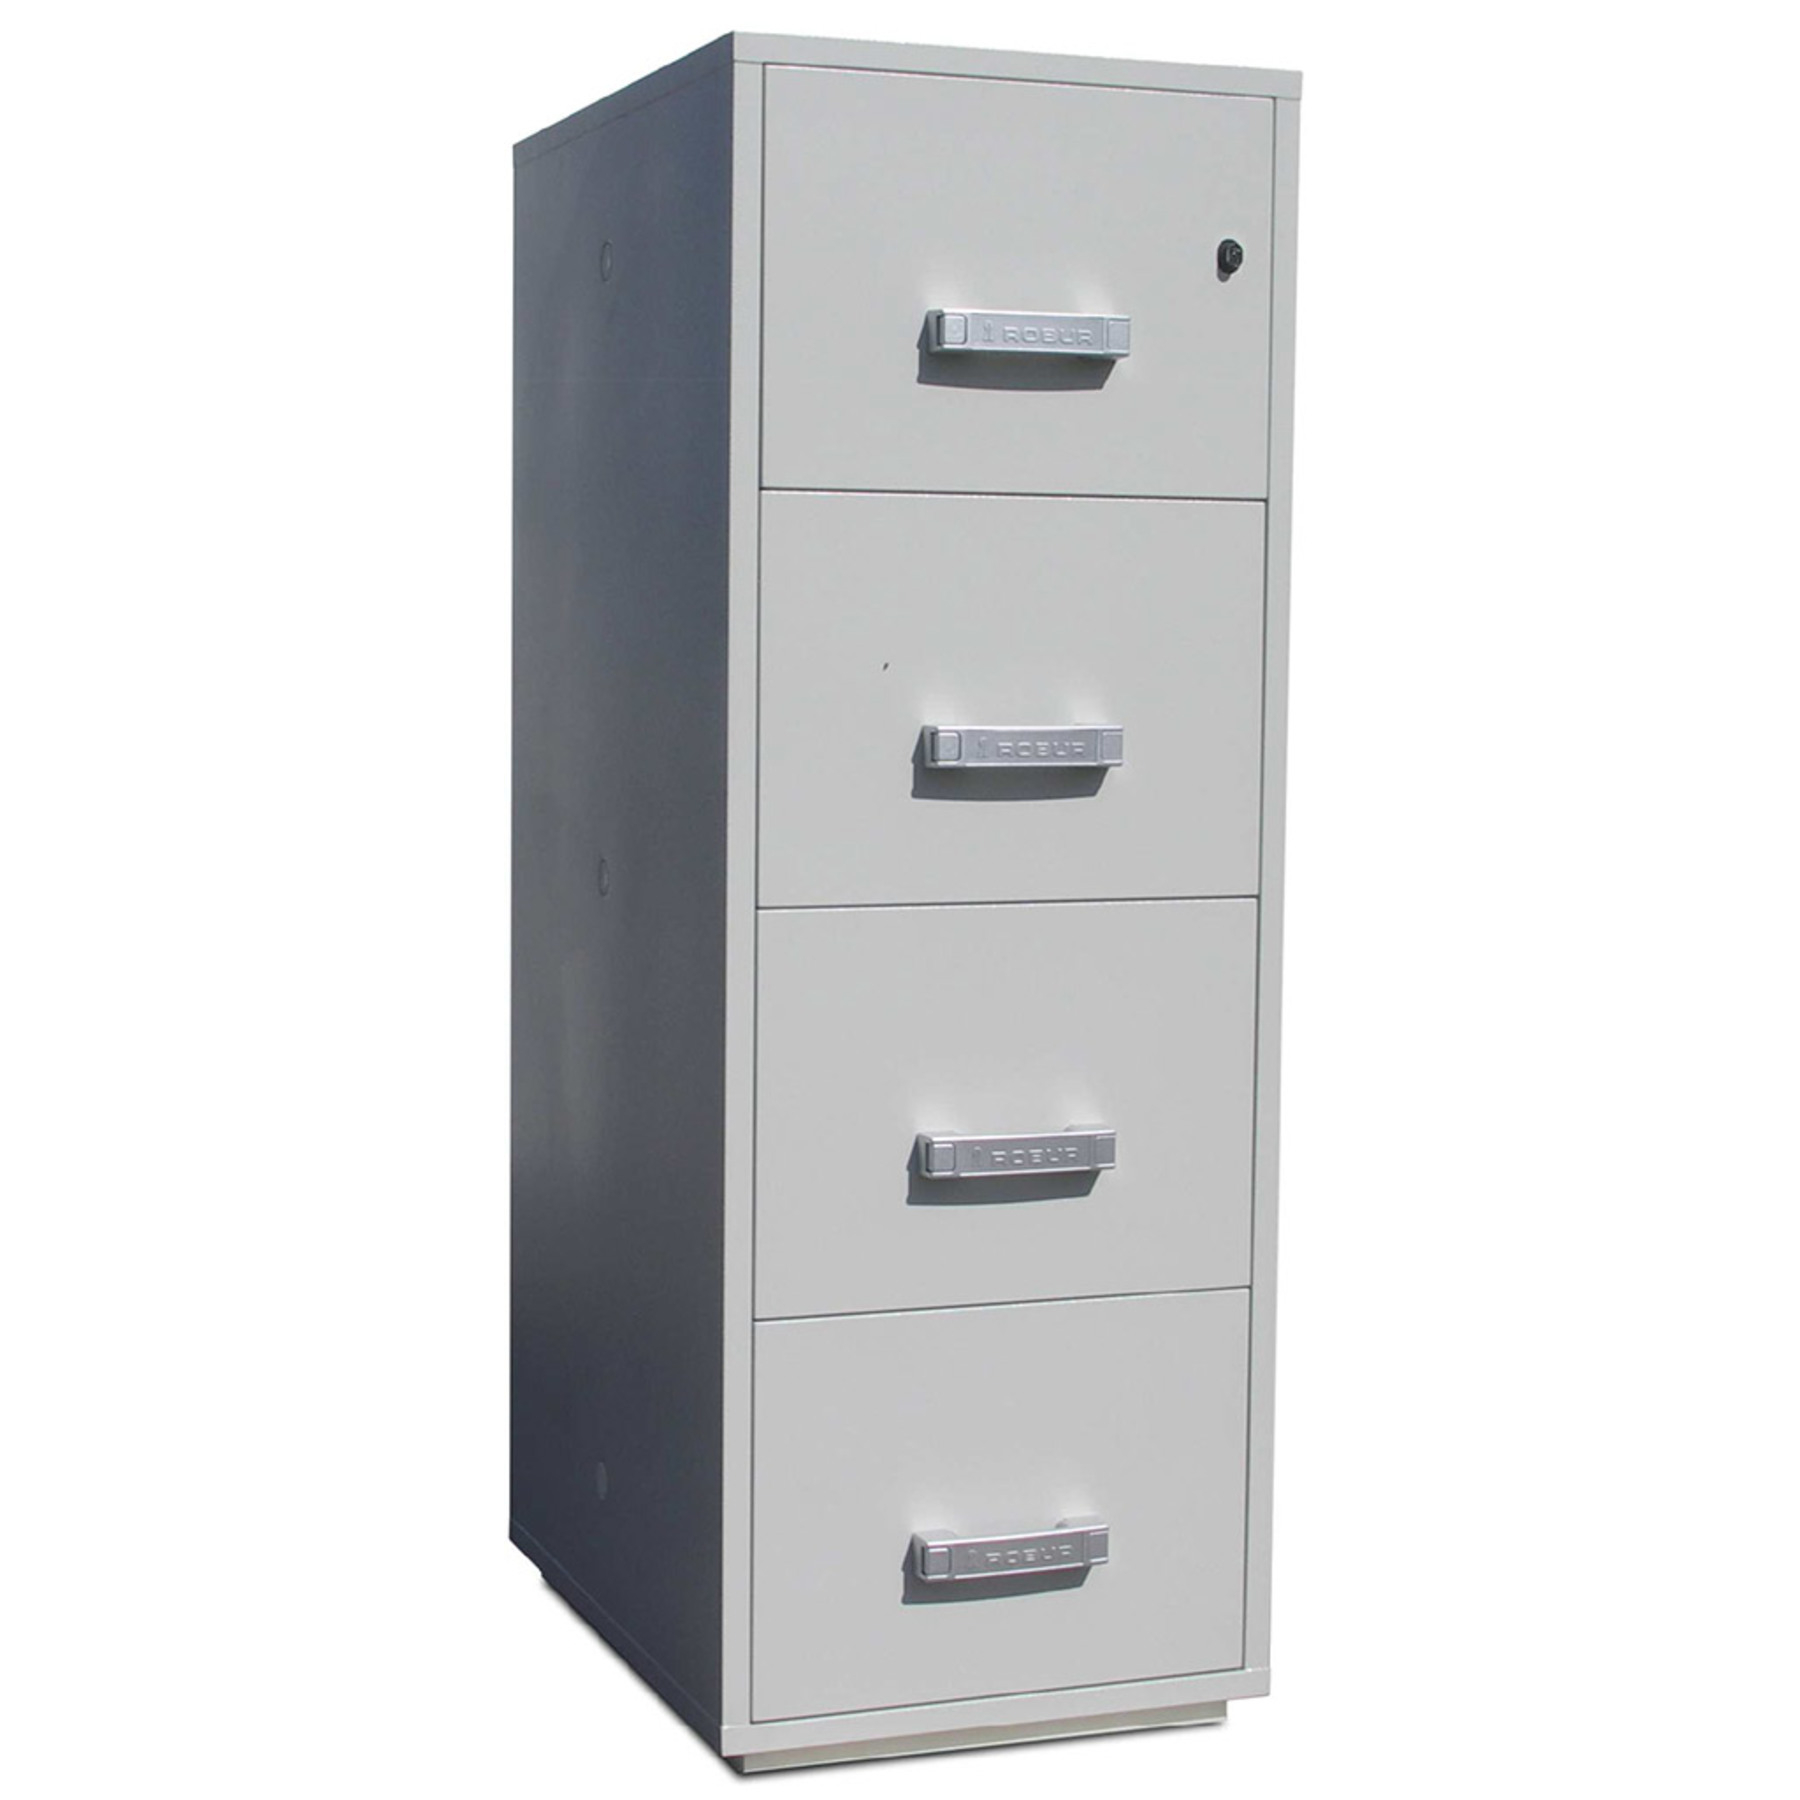 Robur 2 Hour 4 Drawer Fireproof Filing Cabinet All Safes Ireland pertaining to dimensions 1800 X 1800